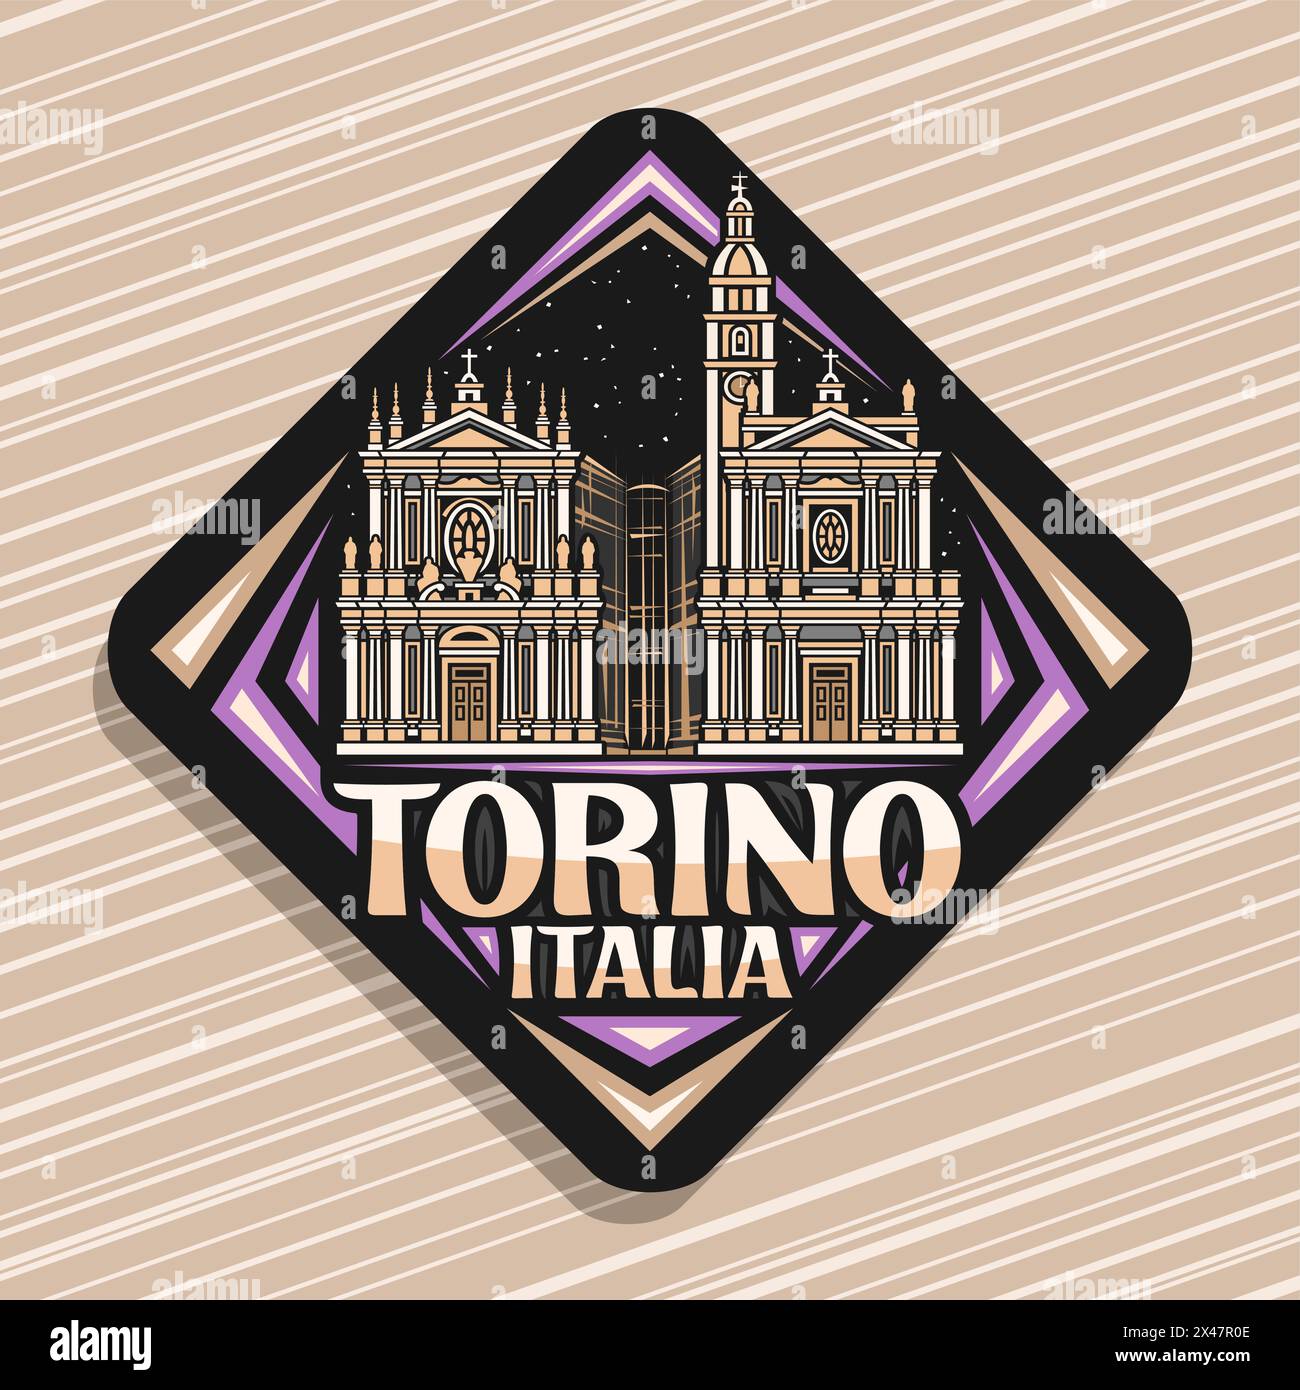 Vector logo for Torino, dark rhombus road sign with line illustration of famous historical twin churches in torino on nighttime sky background, decora Stock Vector